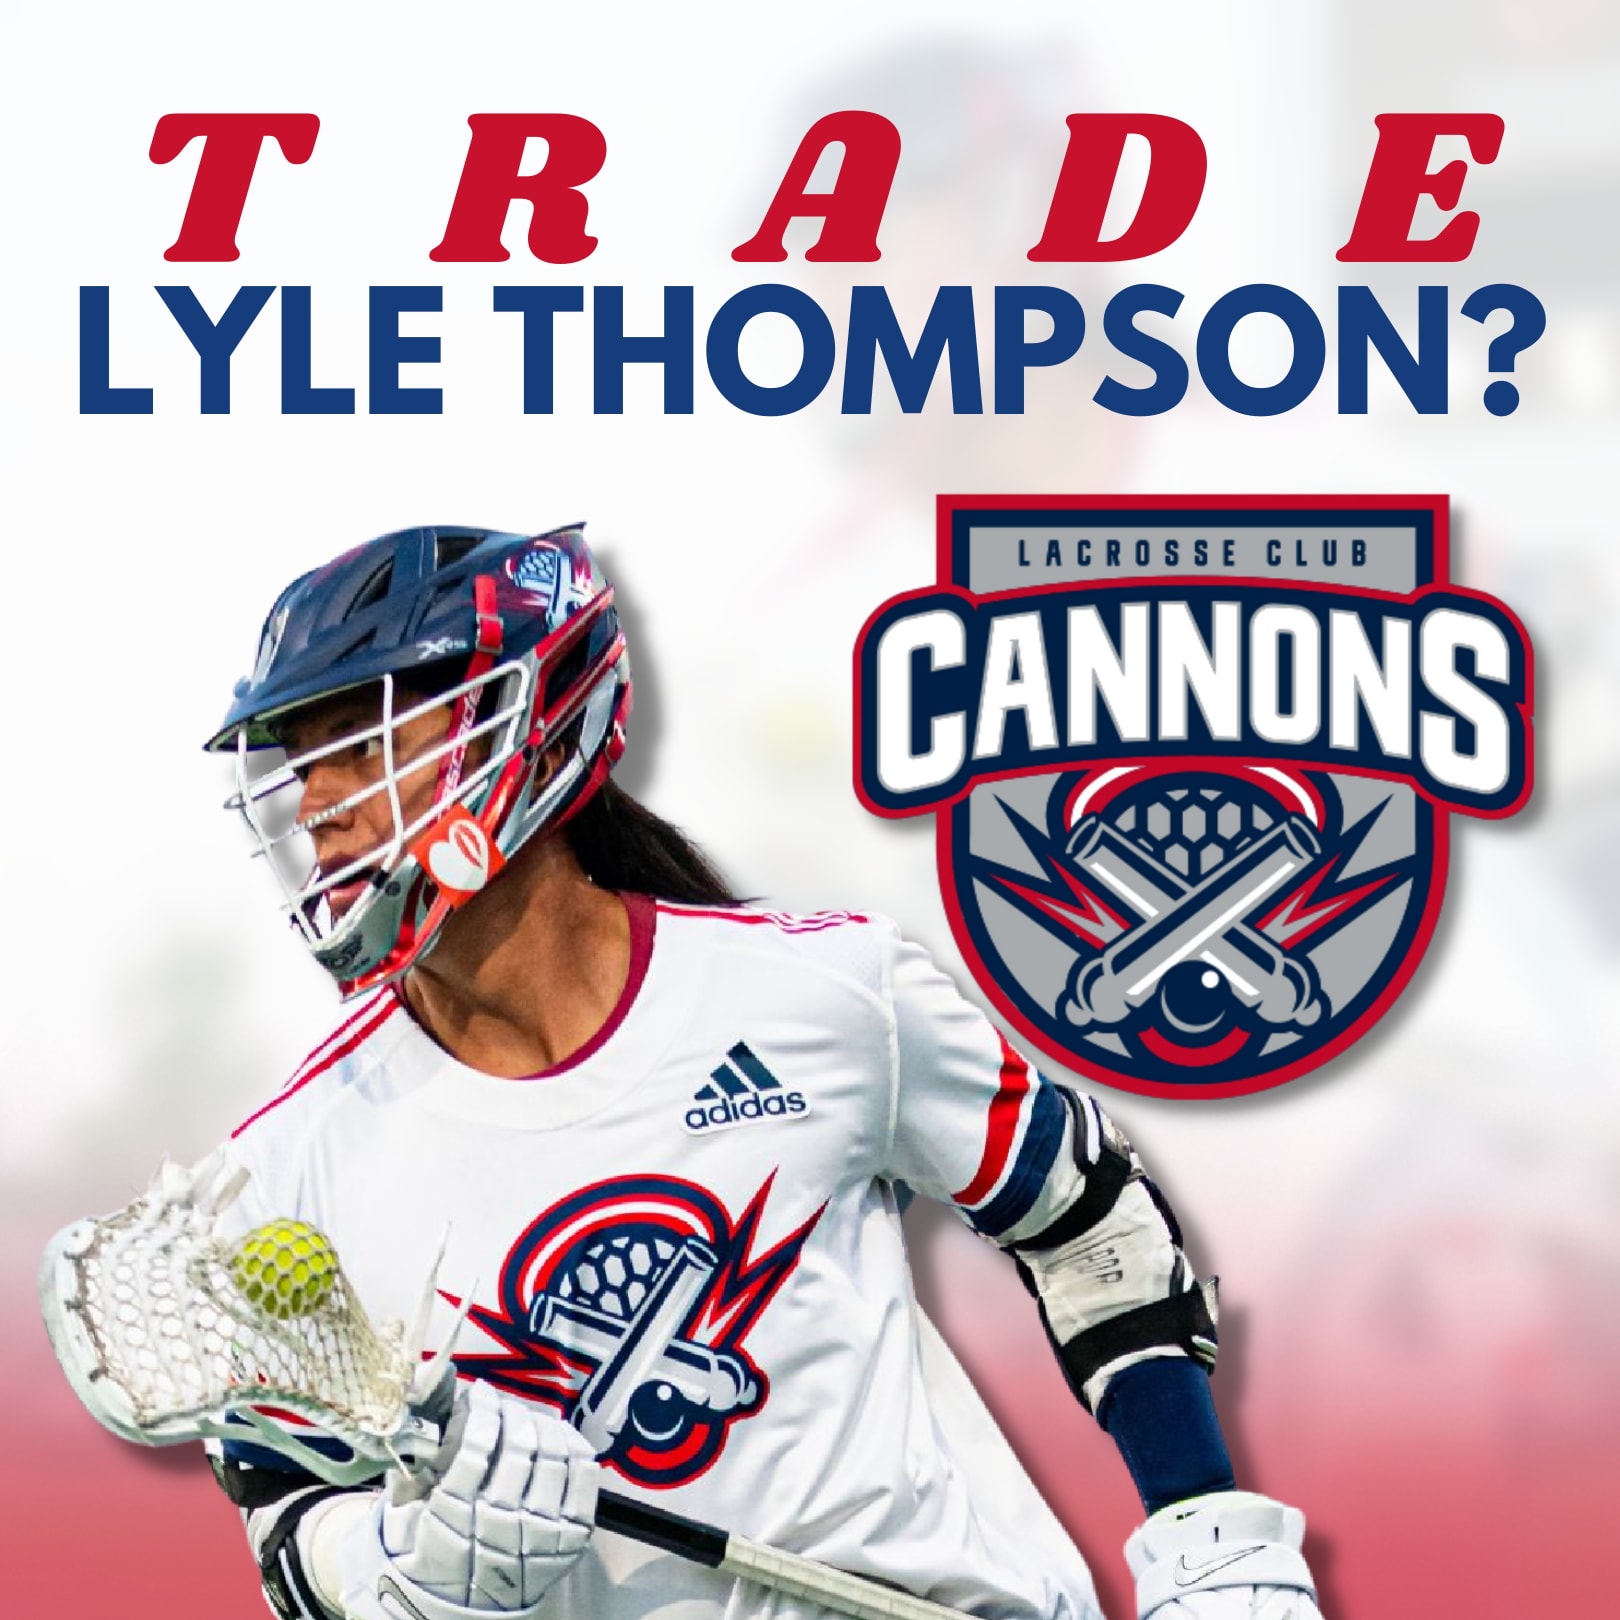 Cannons Lacrosse Club on X: With the #1 Pick in the 2021 Entry Draft, we  have selected @lyle4thompson. Welcome to the Cannons, Lyle 💥💣   / X